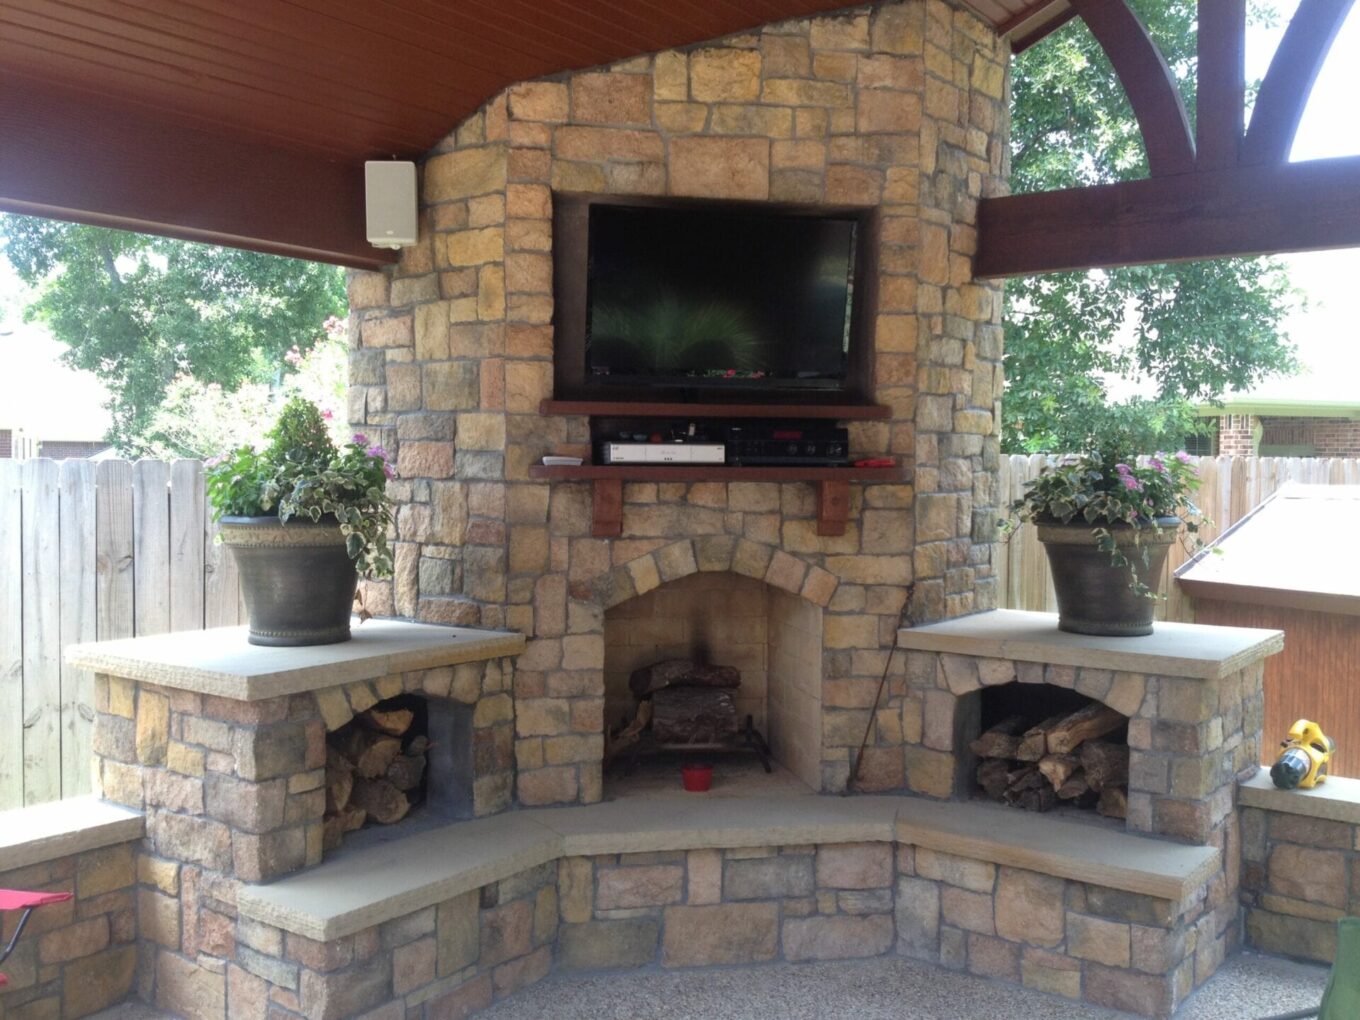 A stone fireplace with a tv mounted on the wall.